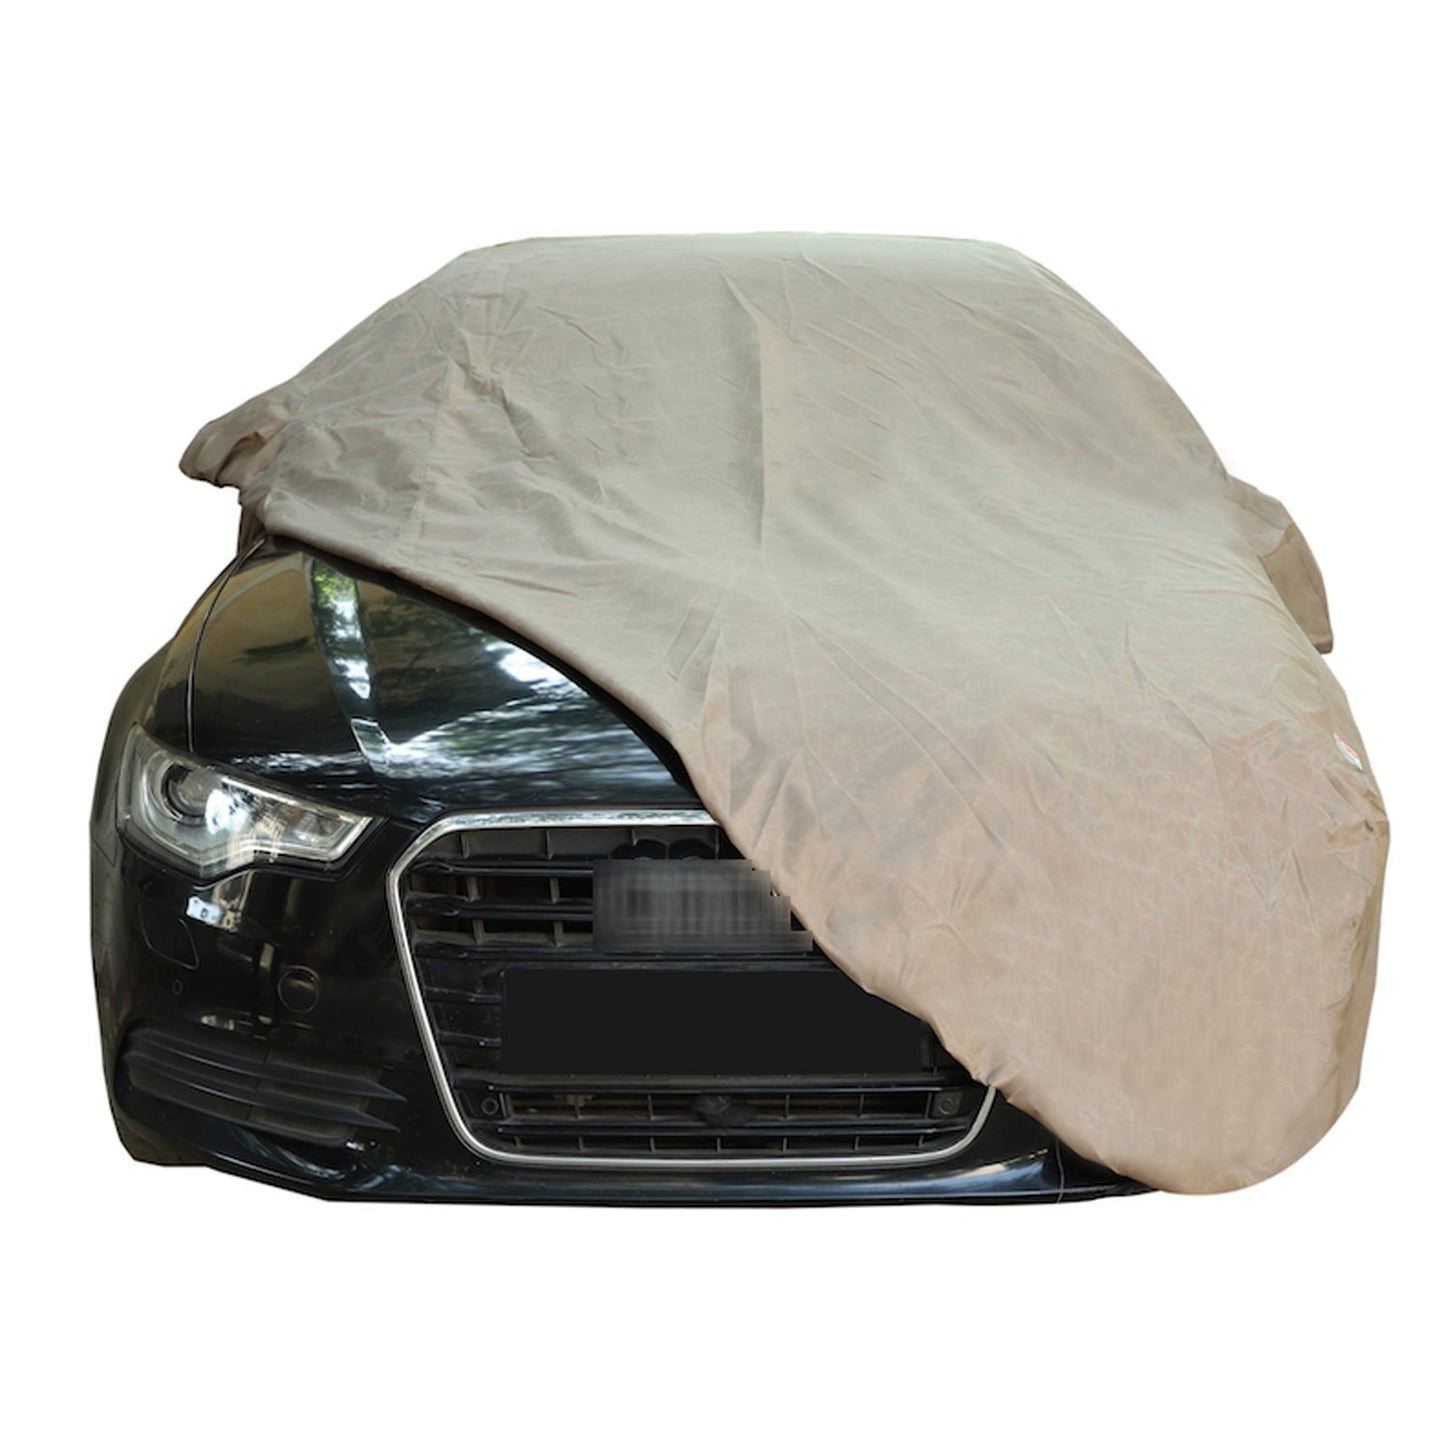 Oshotto Brown 100% Waterproof Car Body Cover with Mirror Pockets For Volvo S-90